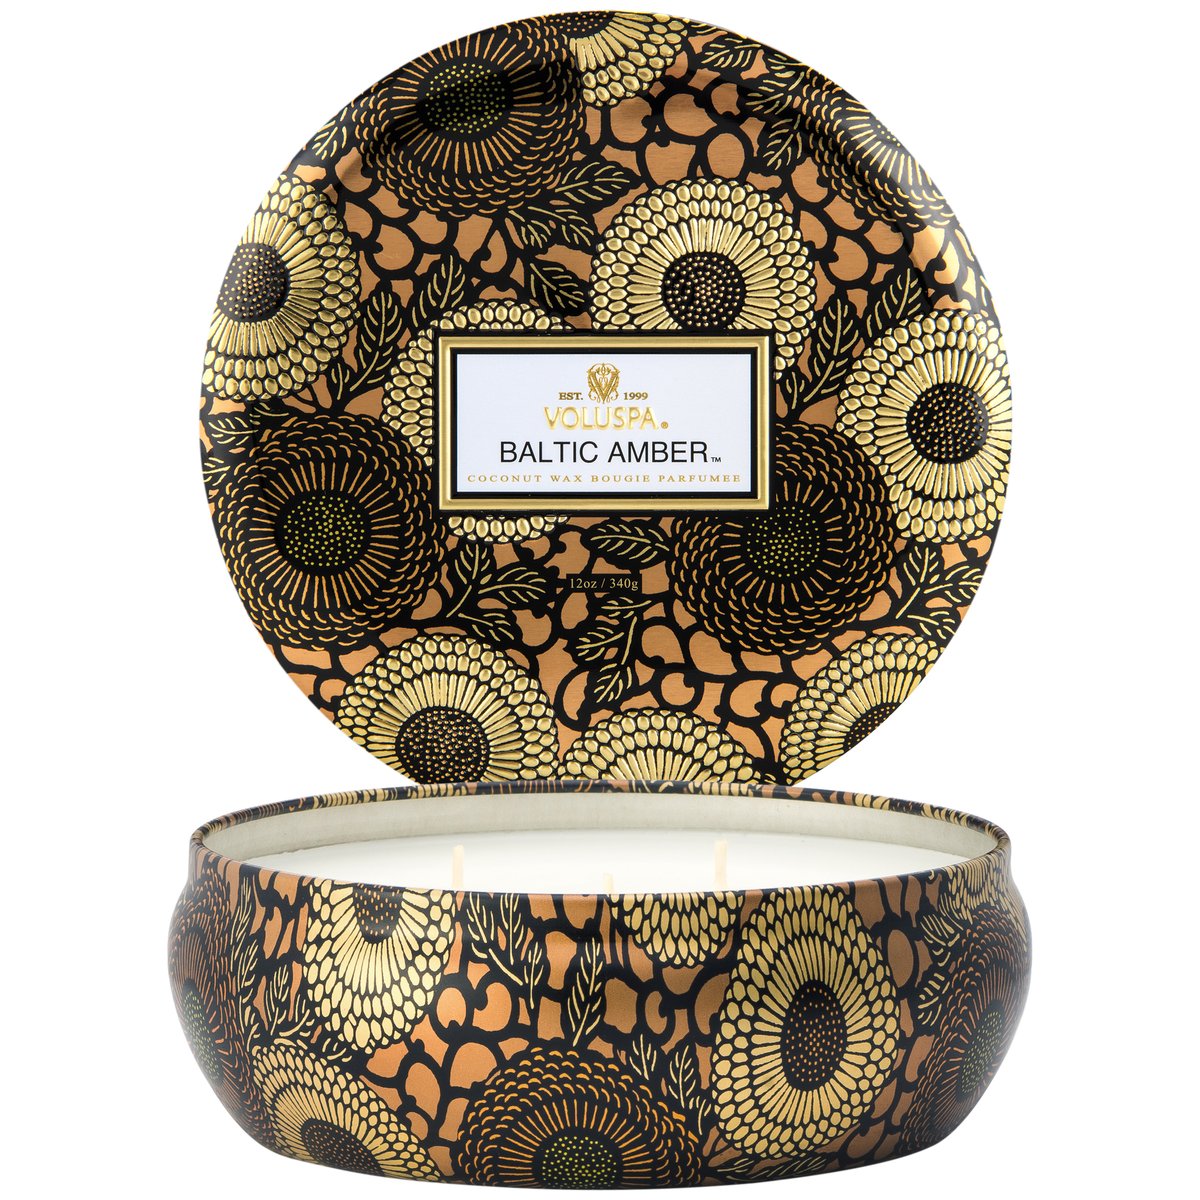 Notes of Amber Resin, Sandalwood, Vanilla Orchid. Rich jewel tones adorn this beautifully patterned metallic option, with fragrance wafting from each of its three wicks.